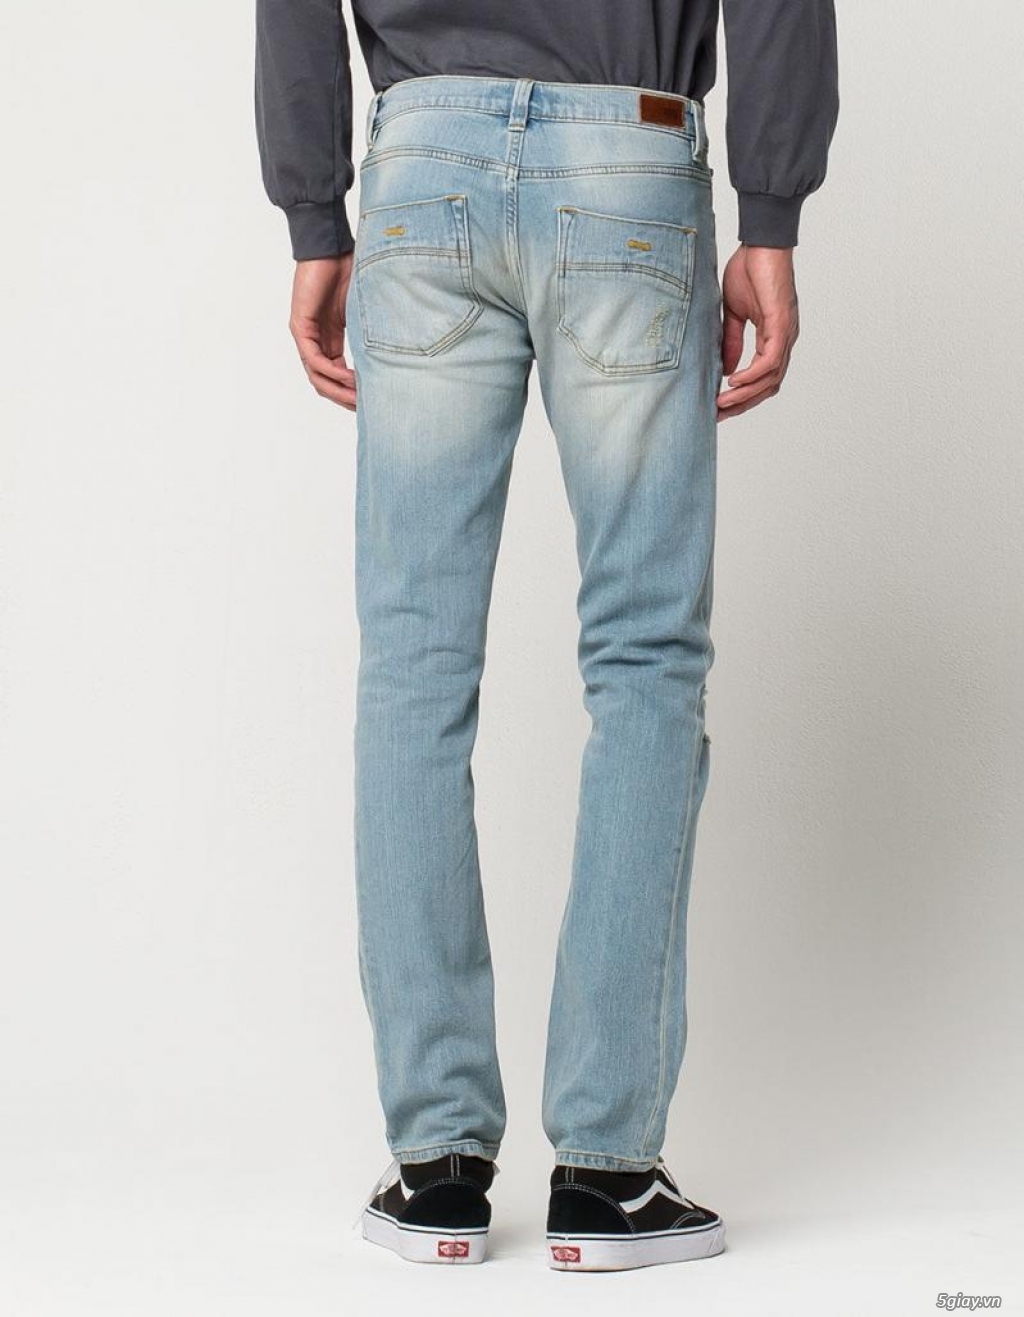 Rsq London Skinny Jeans End 22h5918/8/2019 - 2